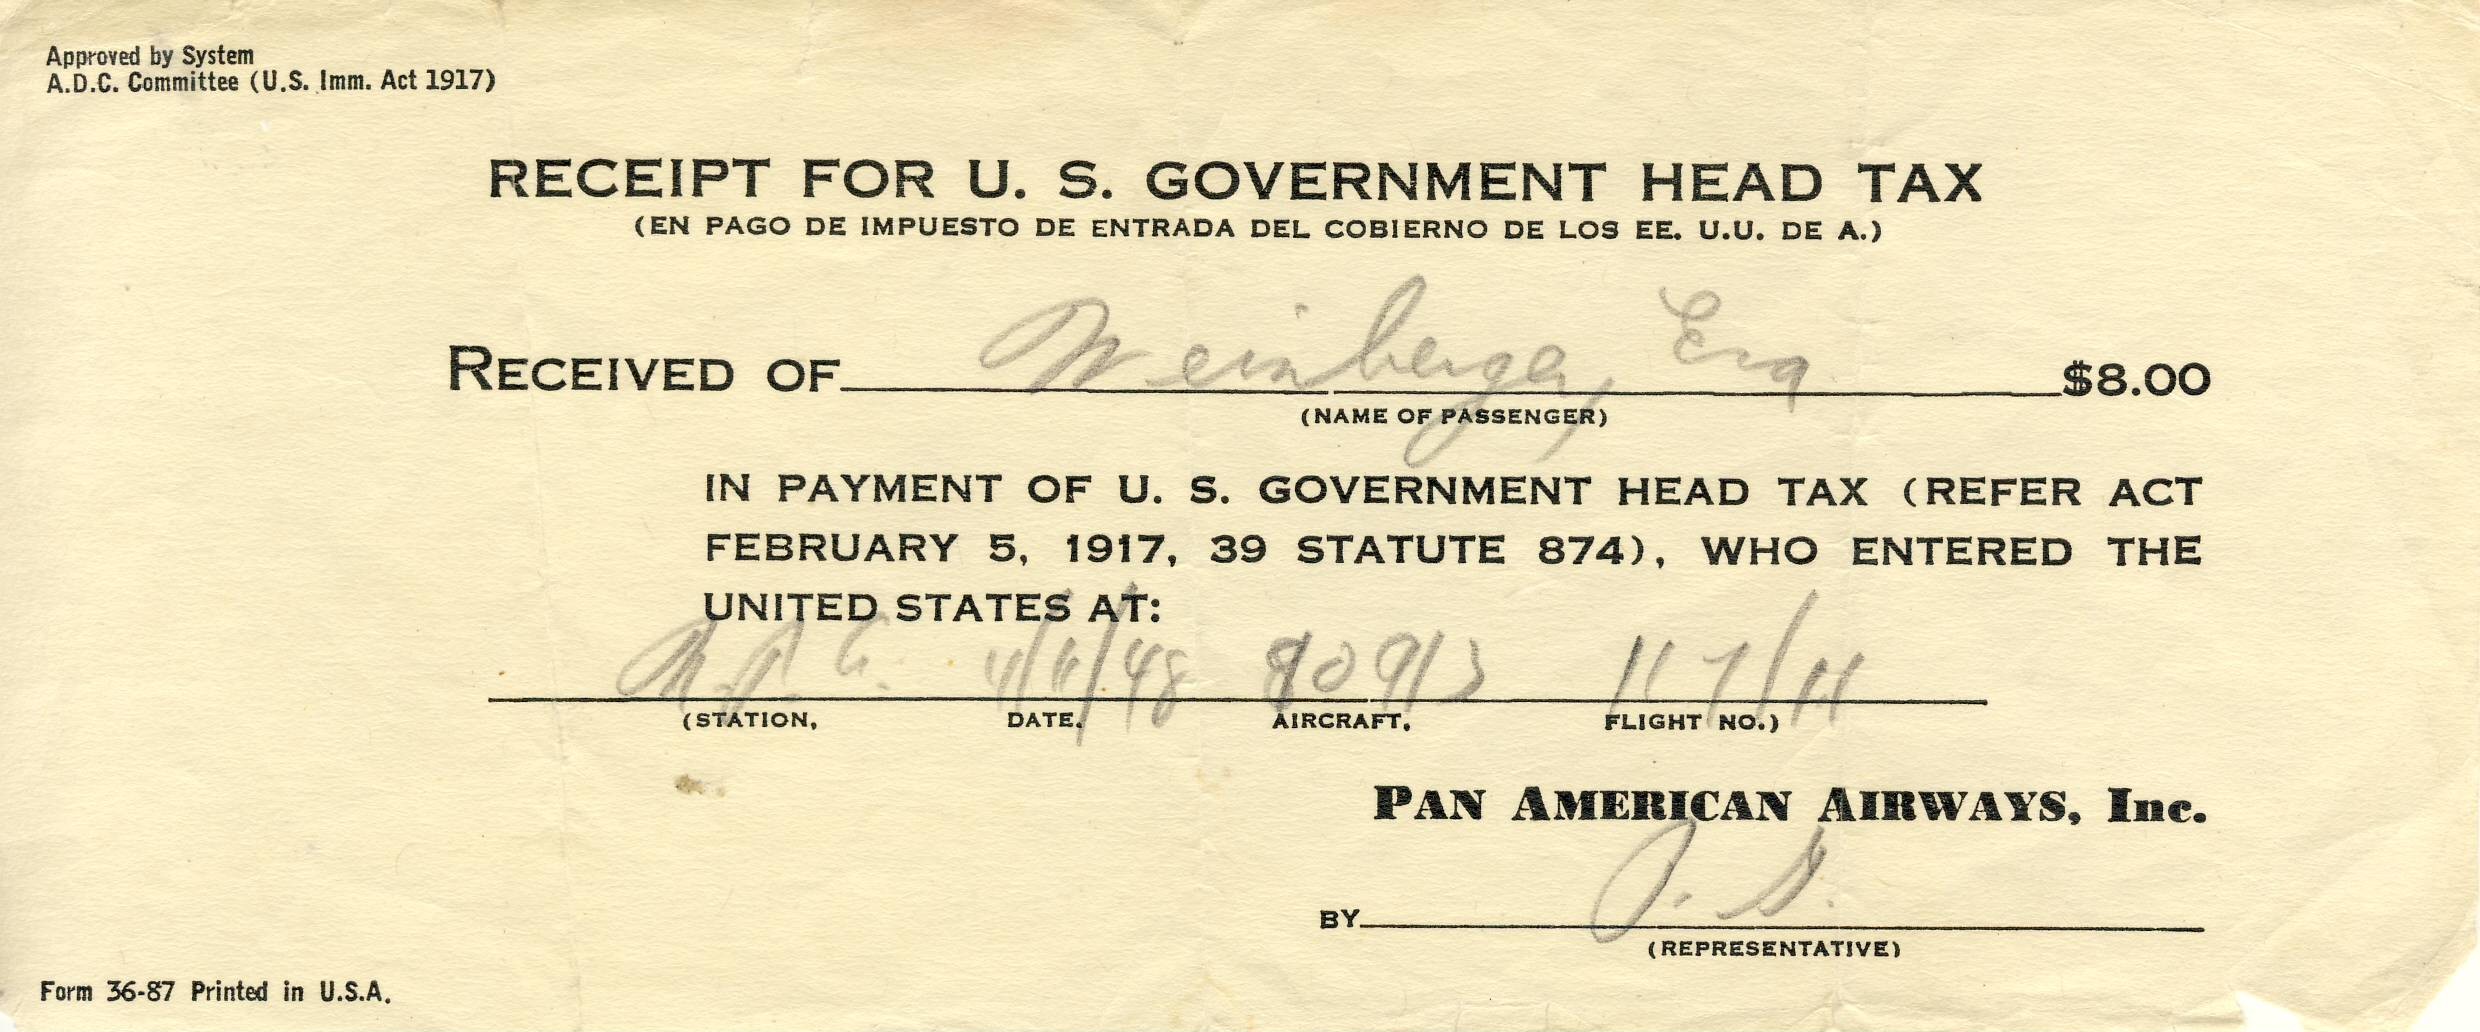 va's Head Tax Document to enter US in 1948